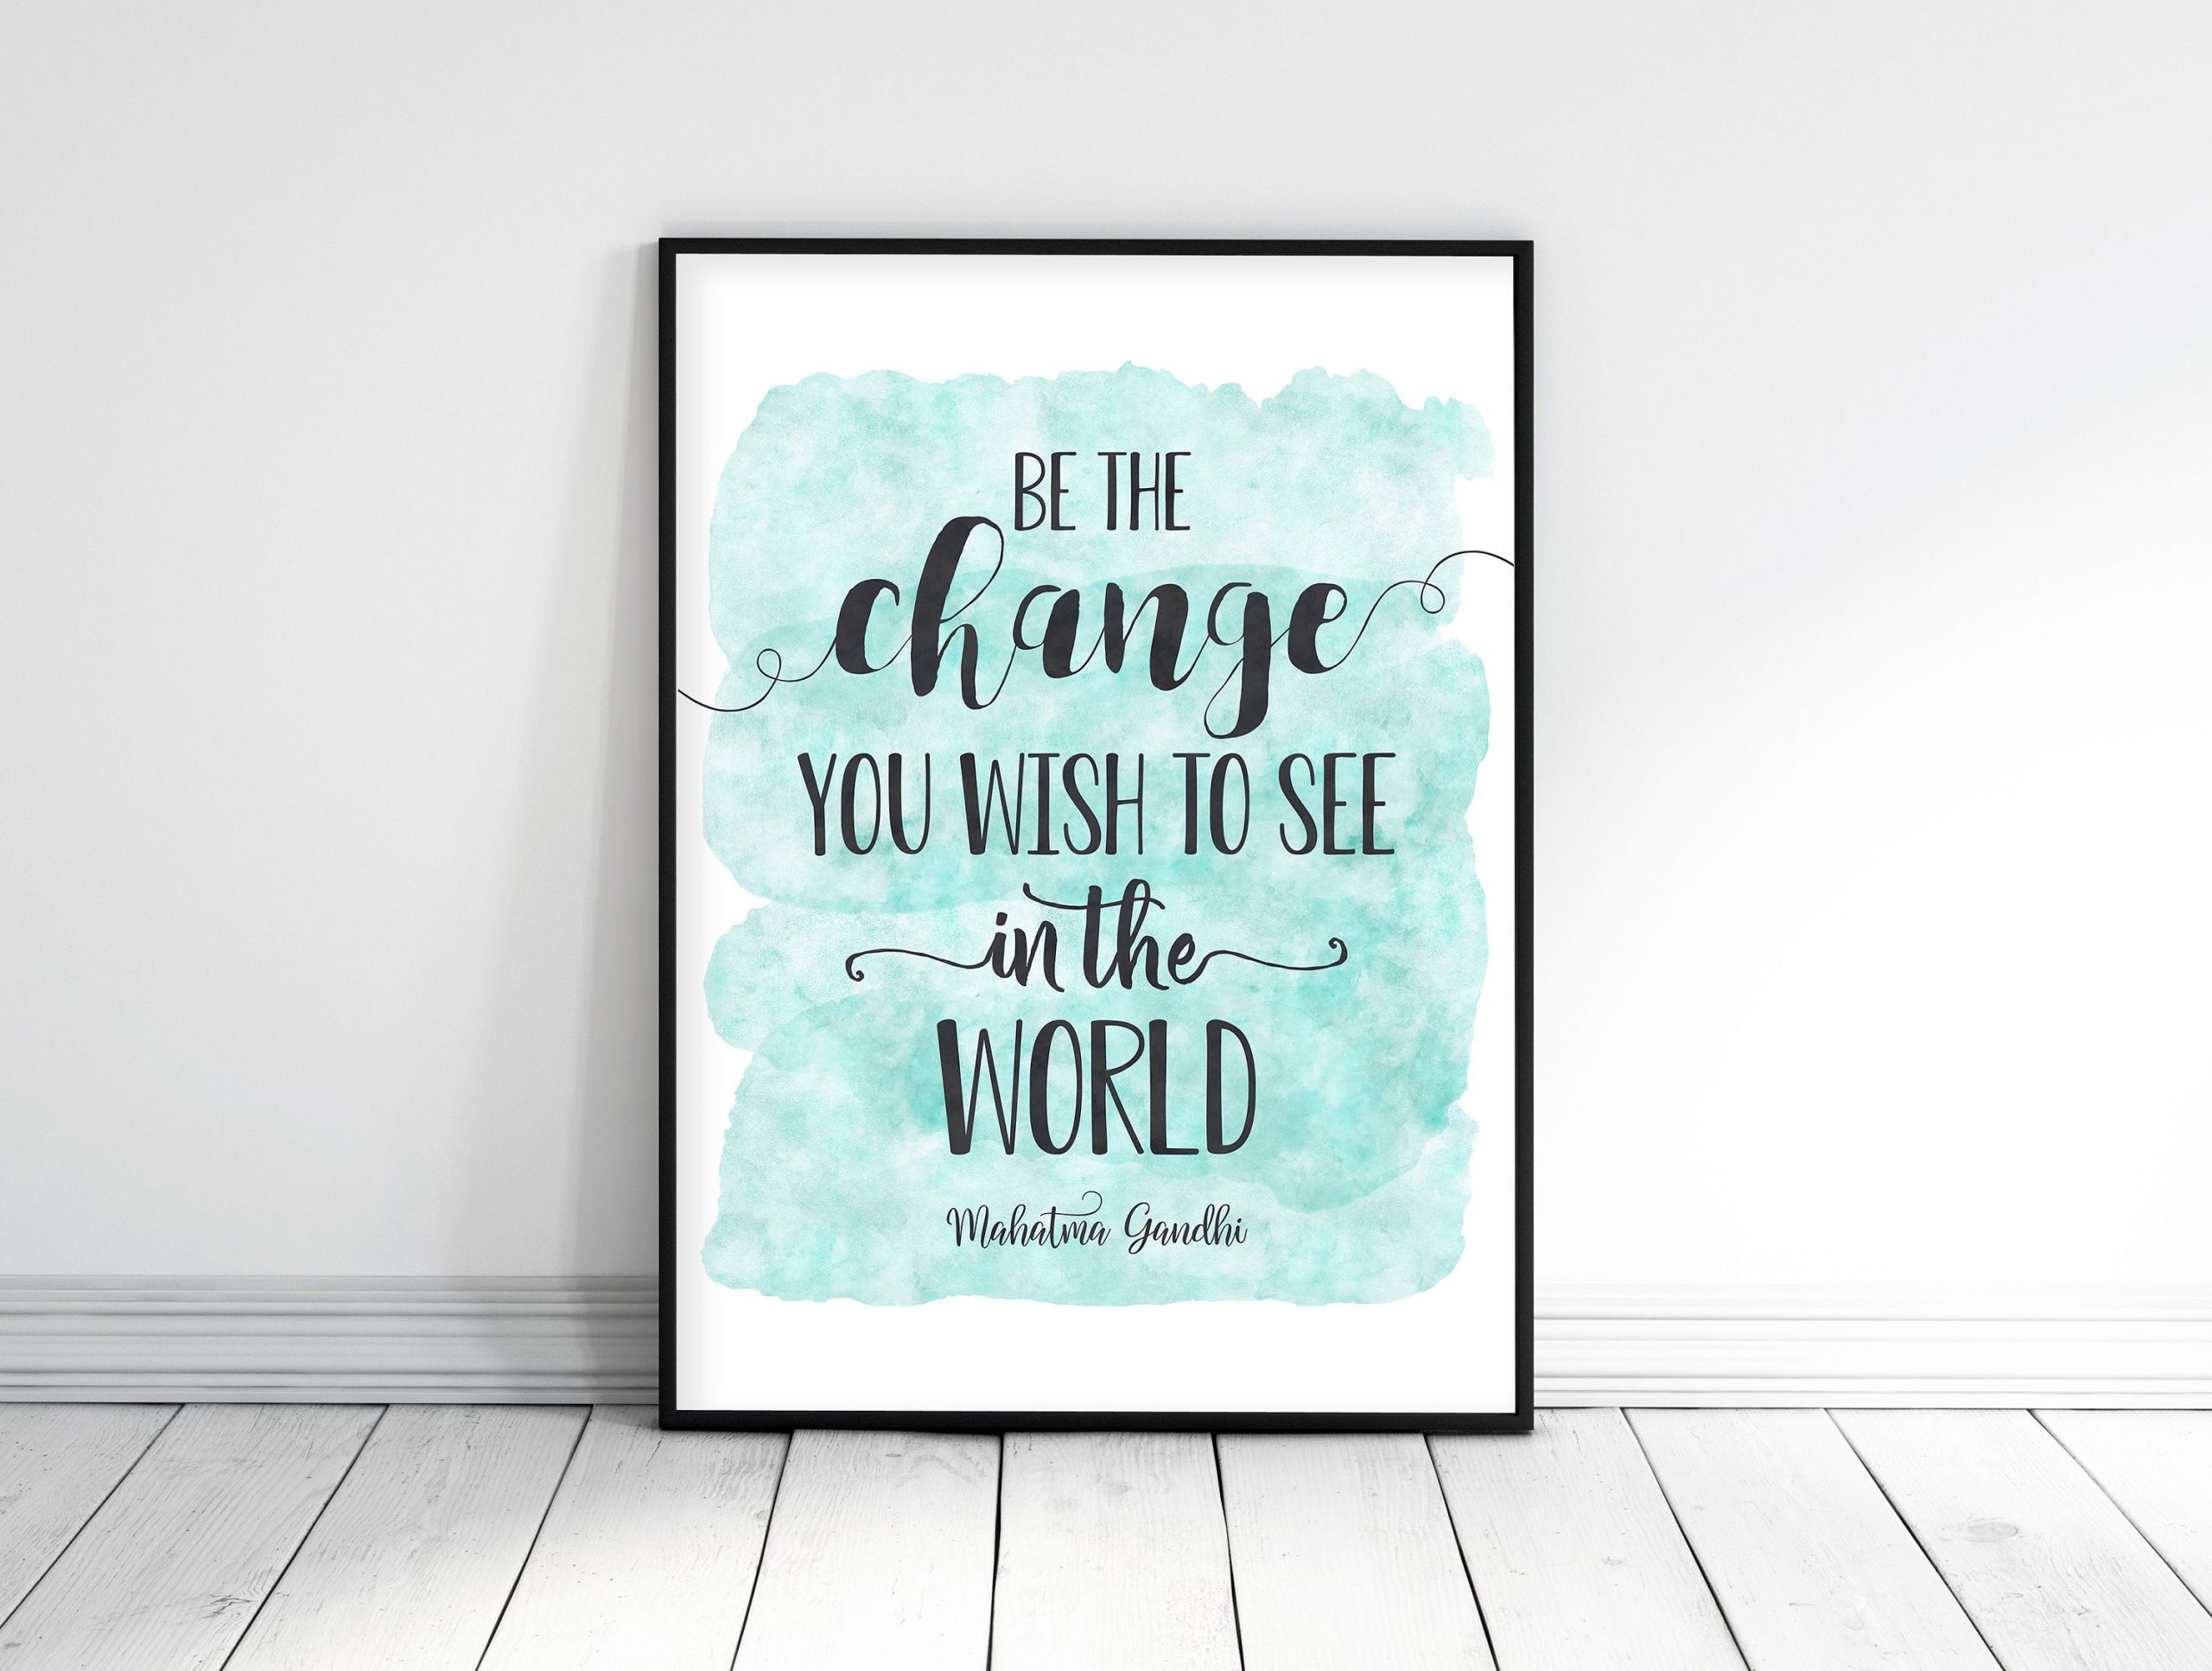 Be The Change You Wish To See In The World, Mahatma Gandhi Quotes Wall Art